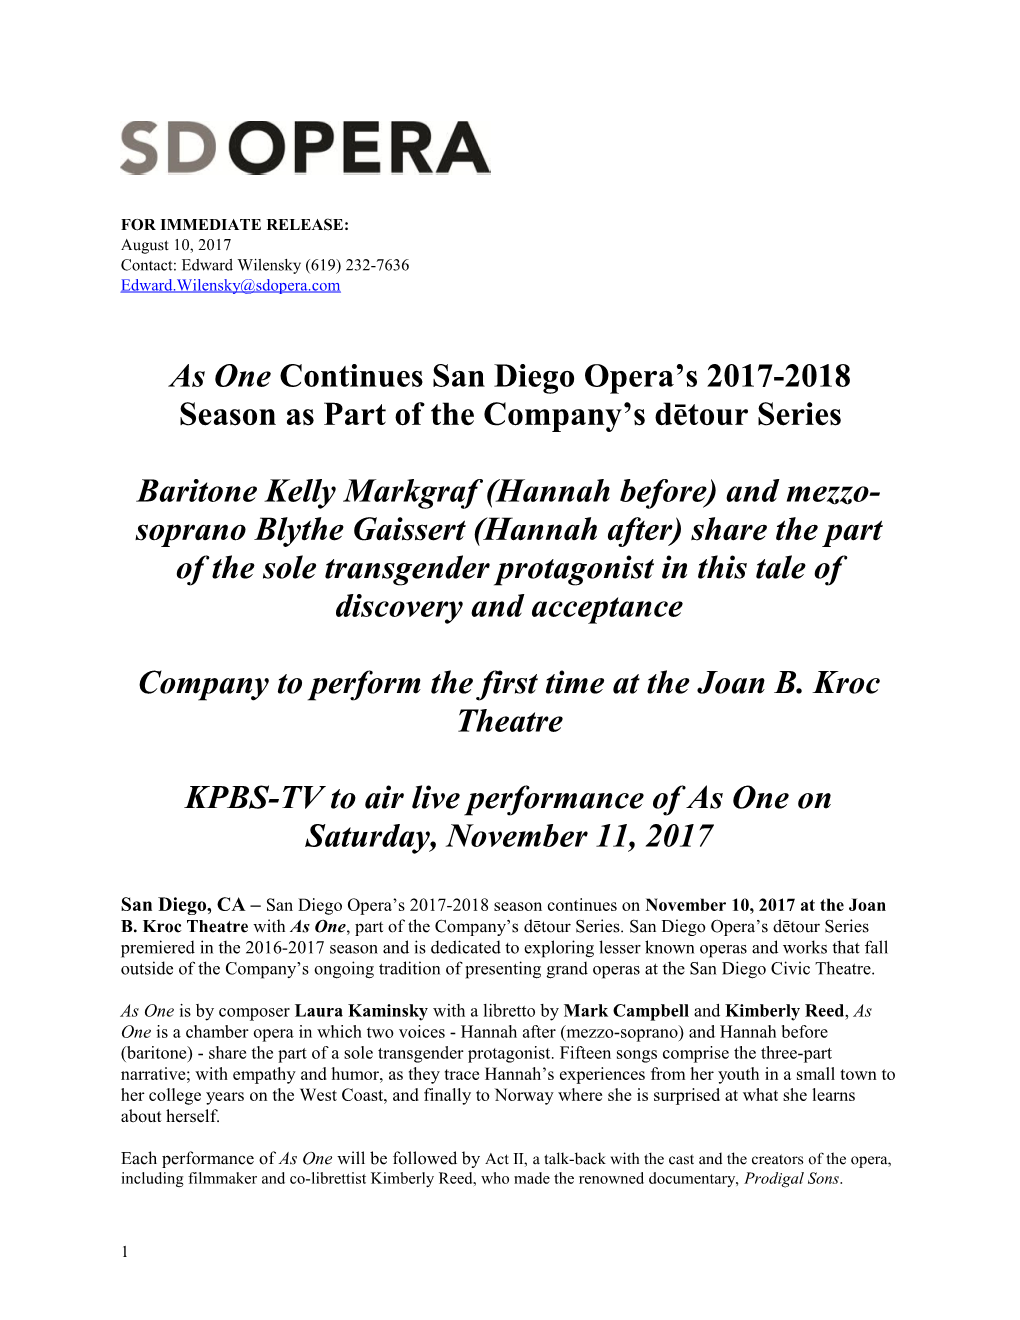 As One Continues San Diego Opera S 2017-2018 Season As Part of the Company S Dētour Series